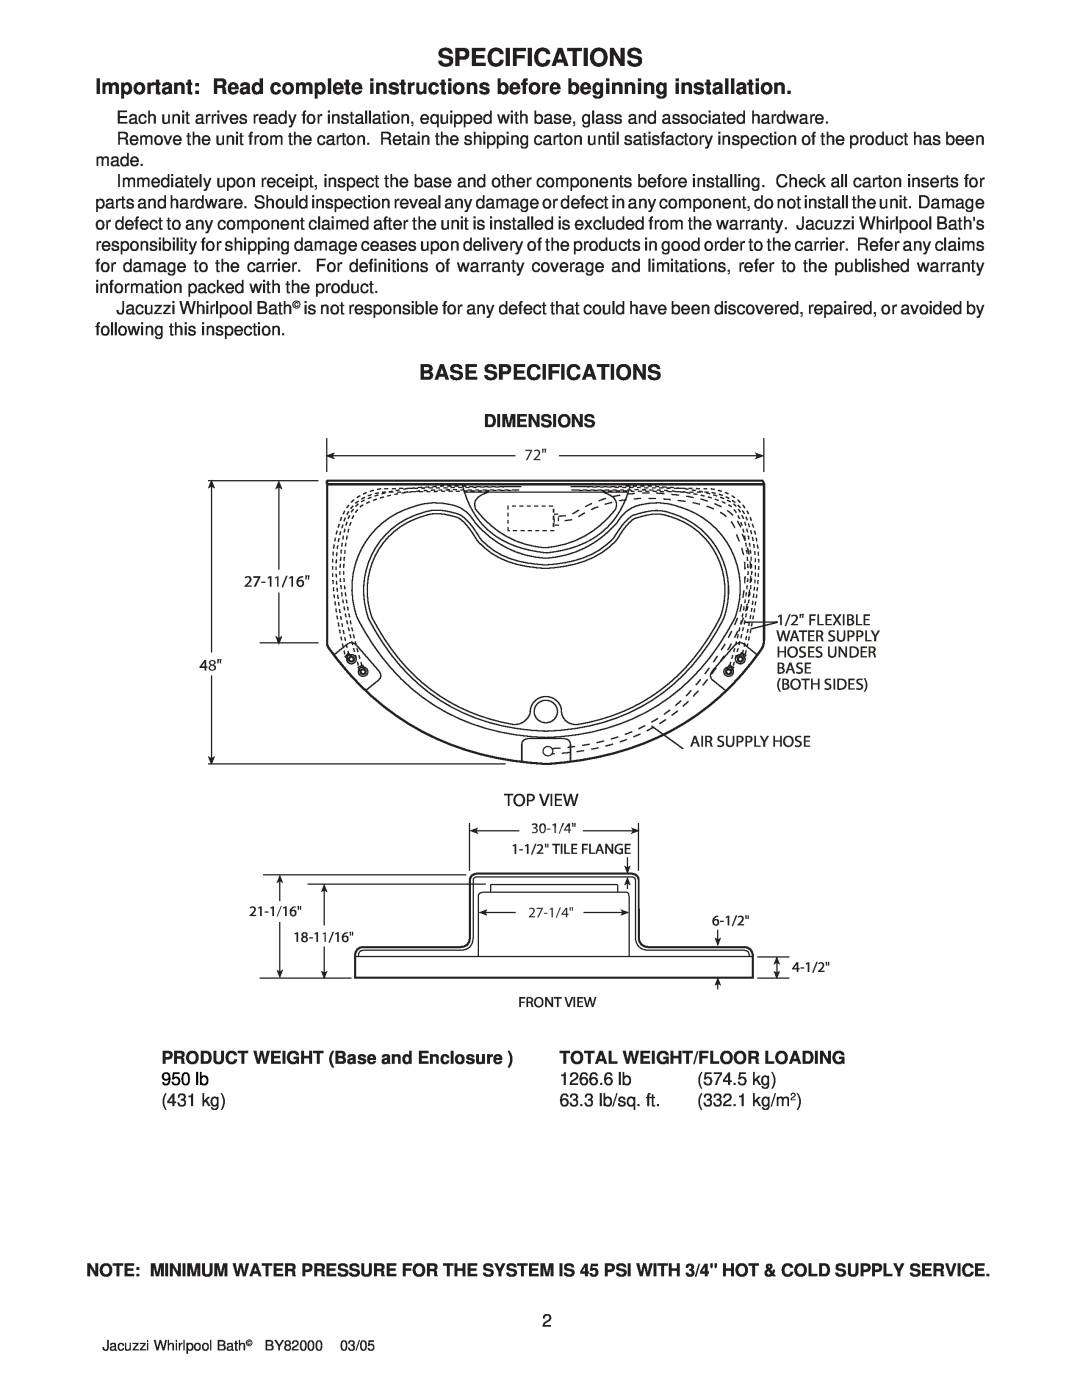 Jacuzzi BY82000 Important Read complete instructions before beginning installation, Base Specifications, Dimensions 